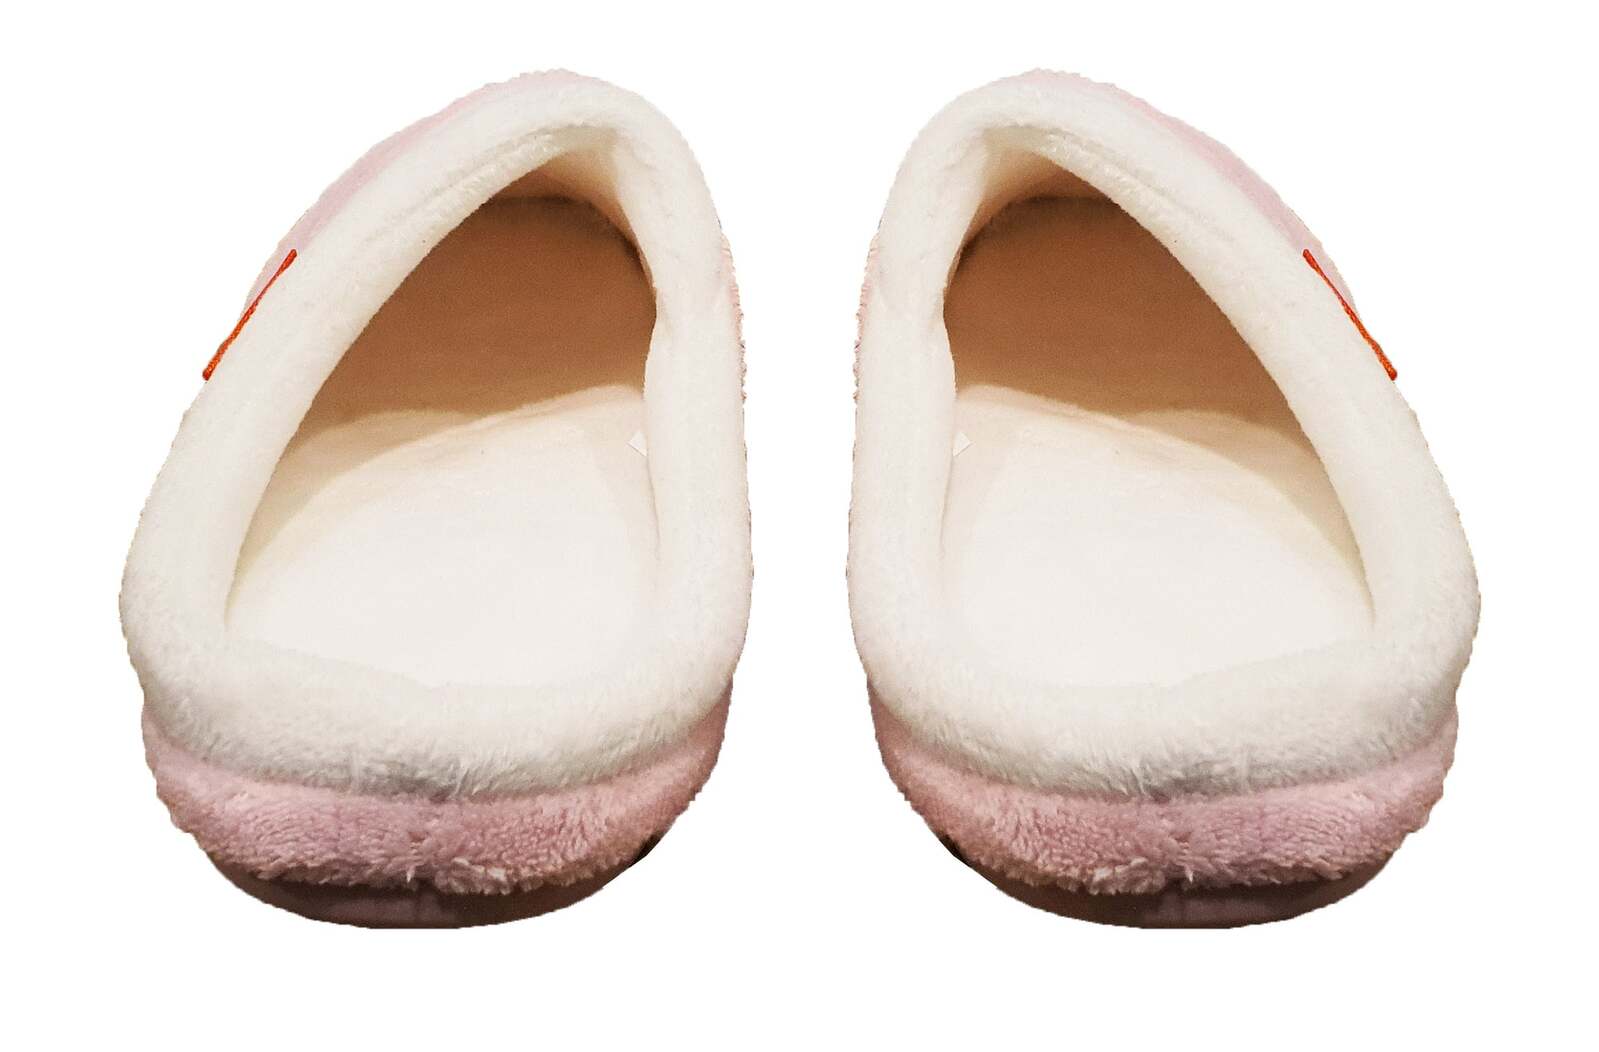 ARCHLINE Orthotic Slippers Slip On Arch Scuffs Pain Relief Moccasins - Pink - EU 40